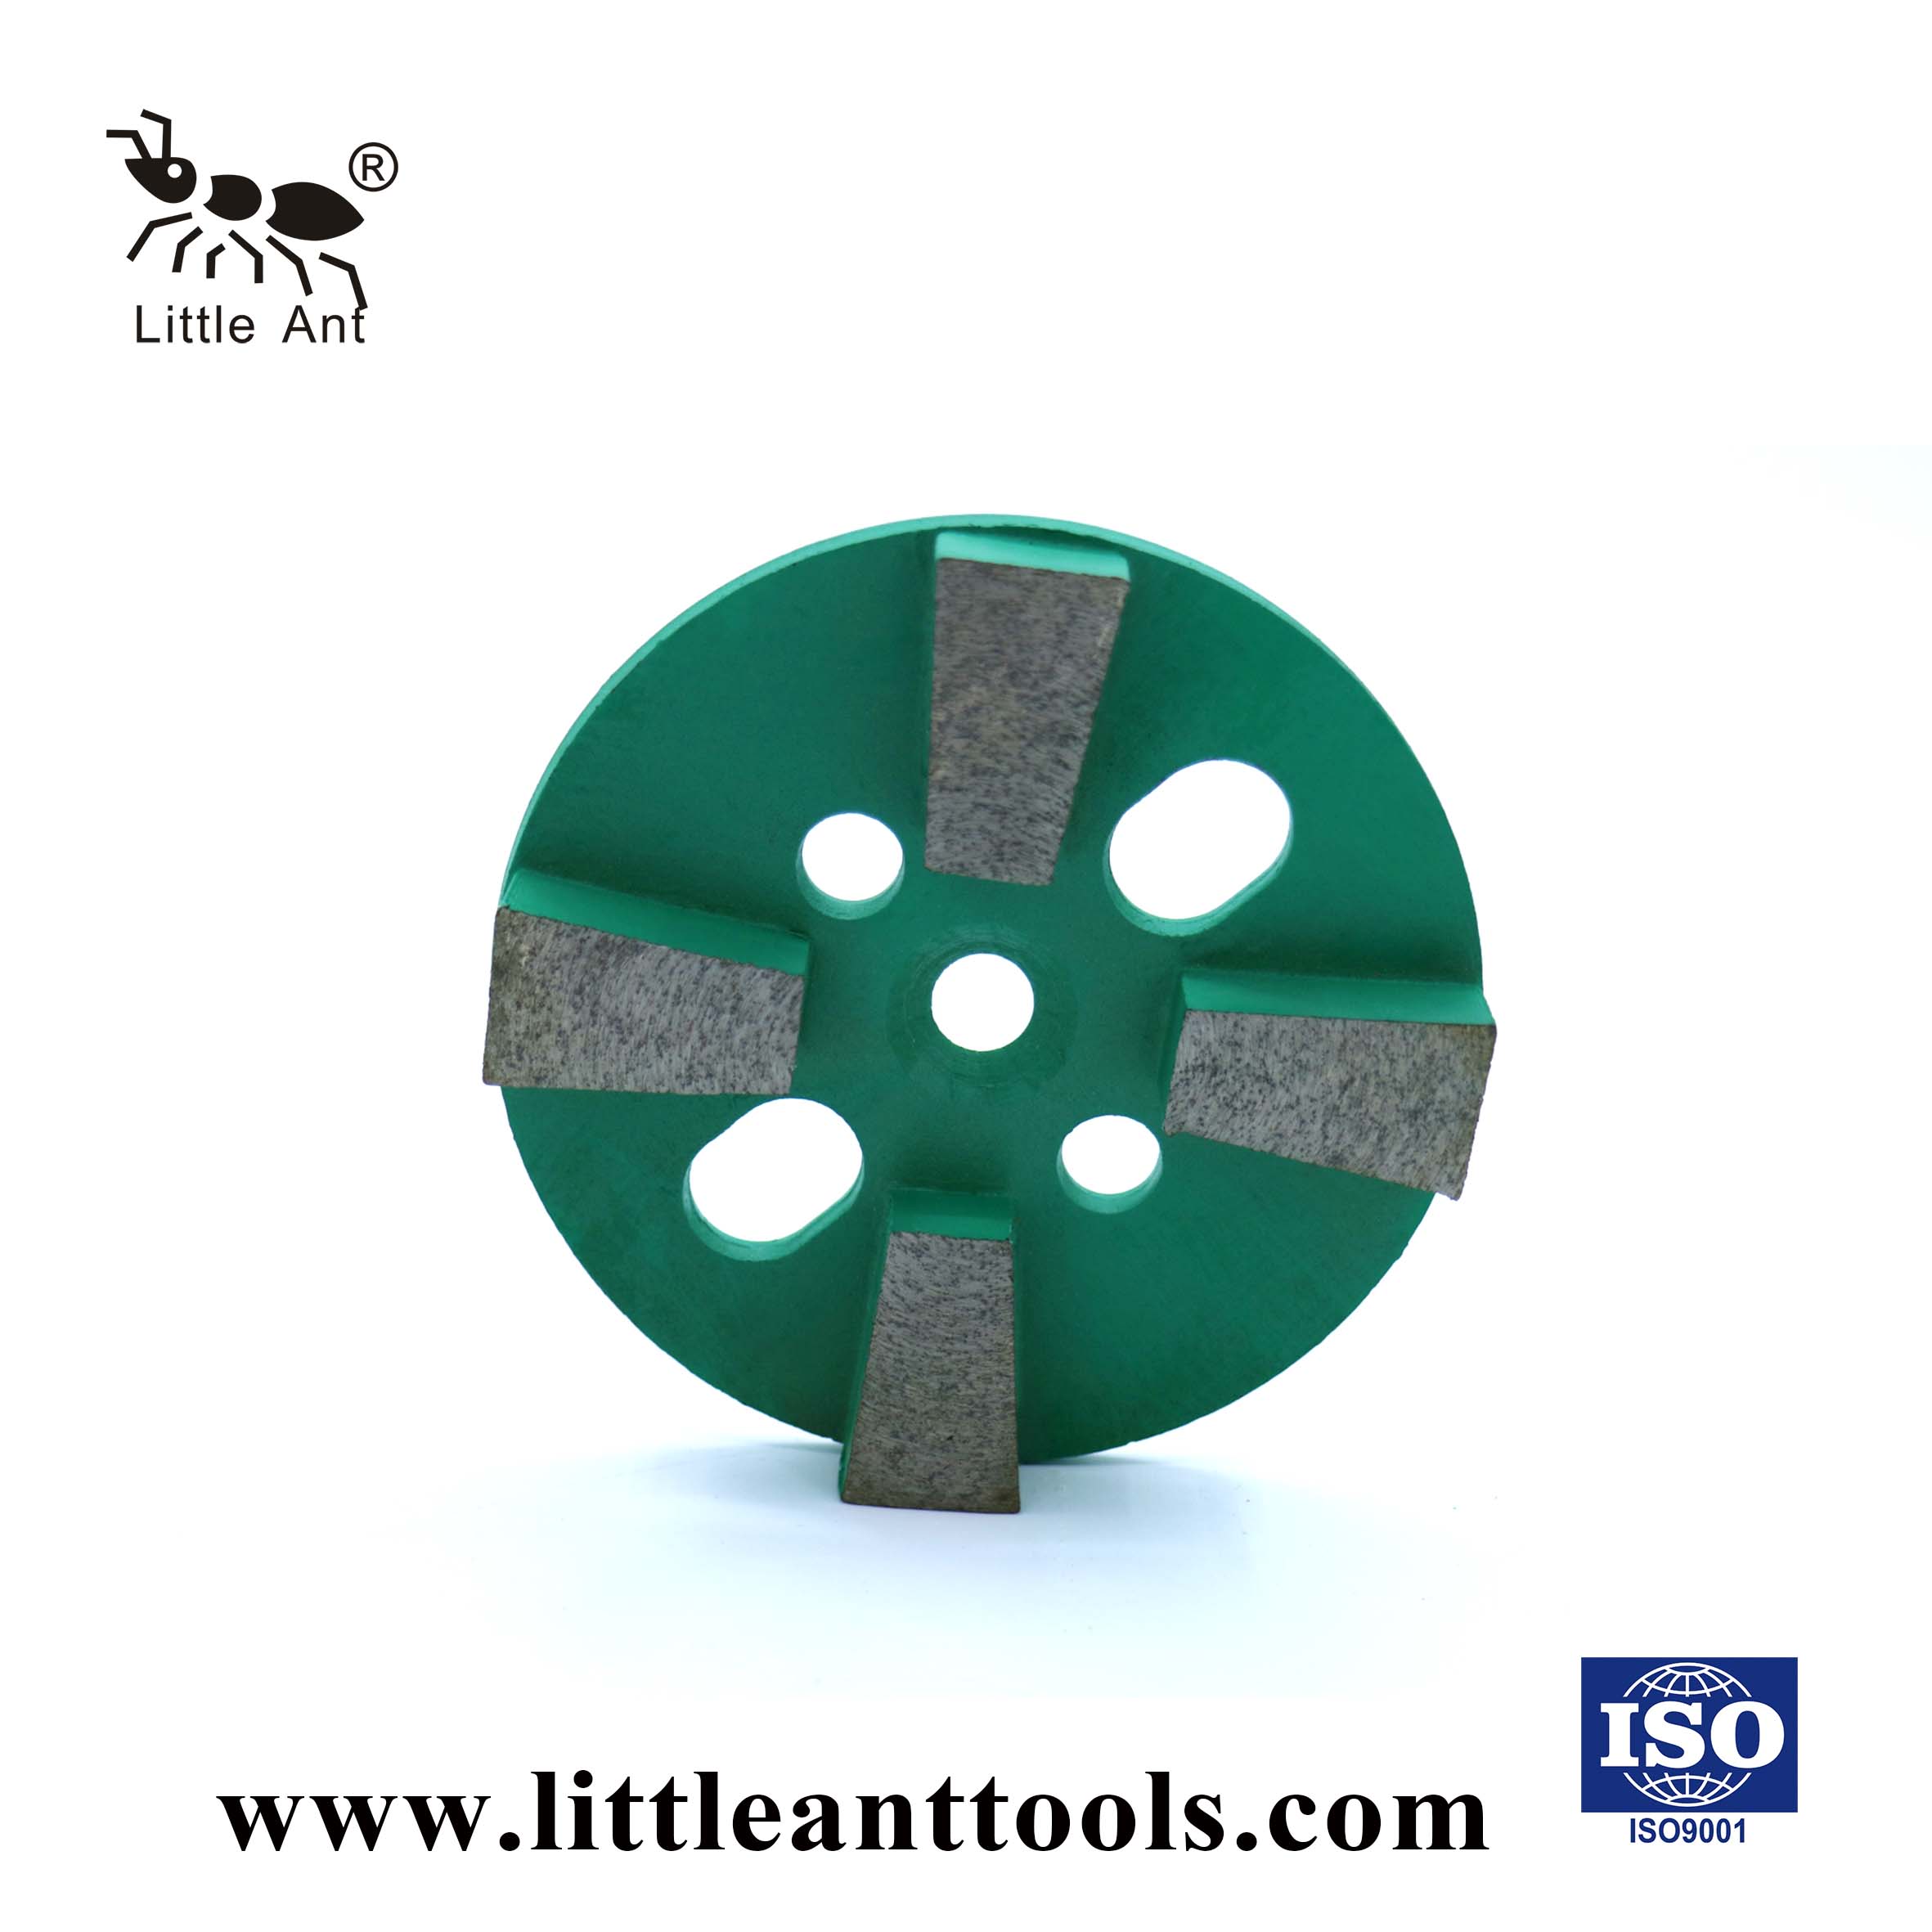 LITTLE ANT Circular Metal Grinding Plate for Concrete Dry And Wet Use Grinding Stone Concrete